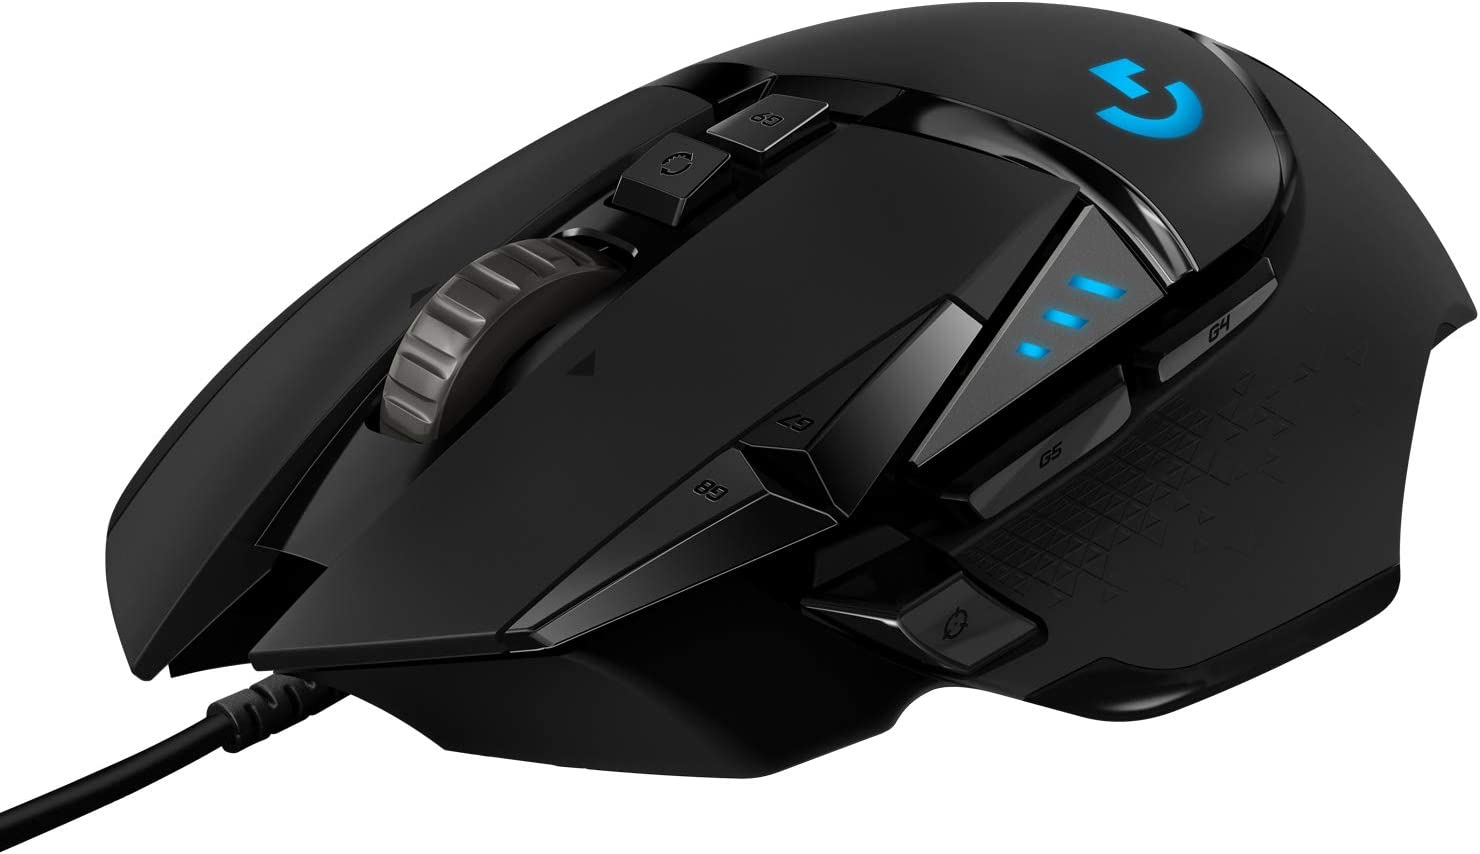 Logitech G502 HERO High-Performance Wired Gaming Mouse - Black (Refurbished)